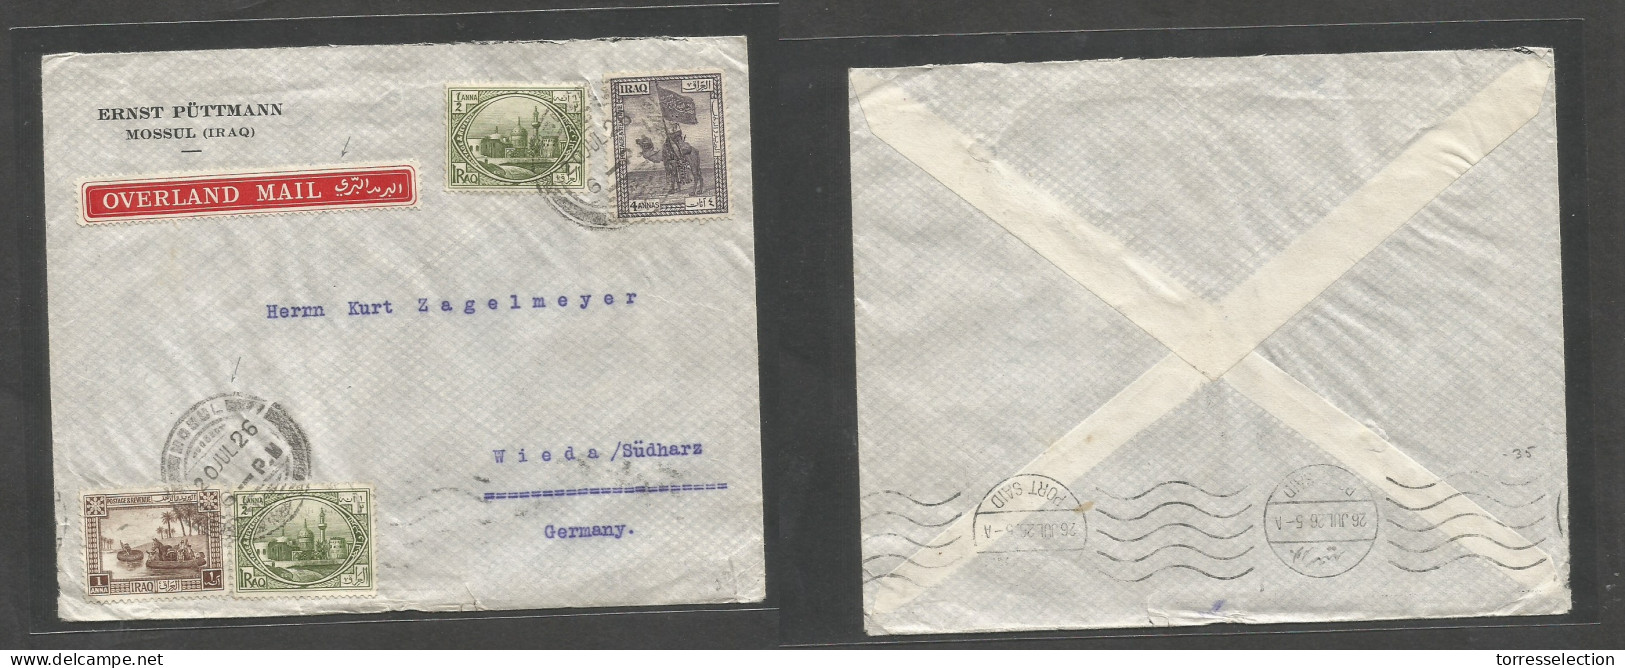 IRAQ. 1926 (20 July) Mosul - Germany, Wieda. Multifkd Env Via Port Said (26 July) With Red Label "OVERLAND MAIL" Tied Cd - Iraq